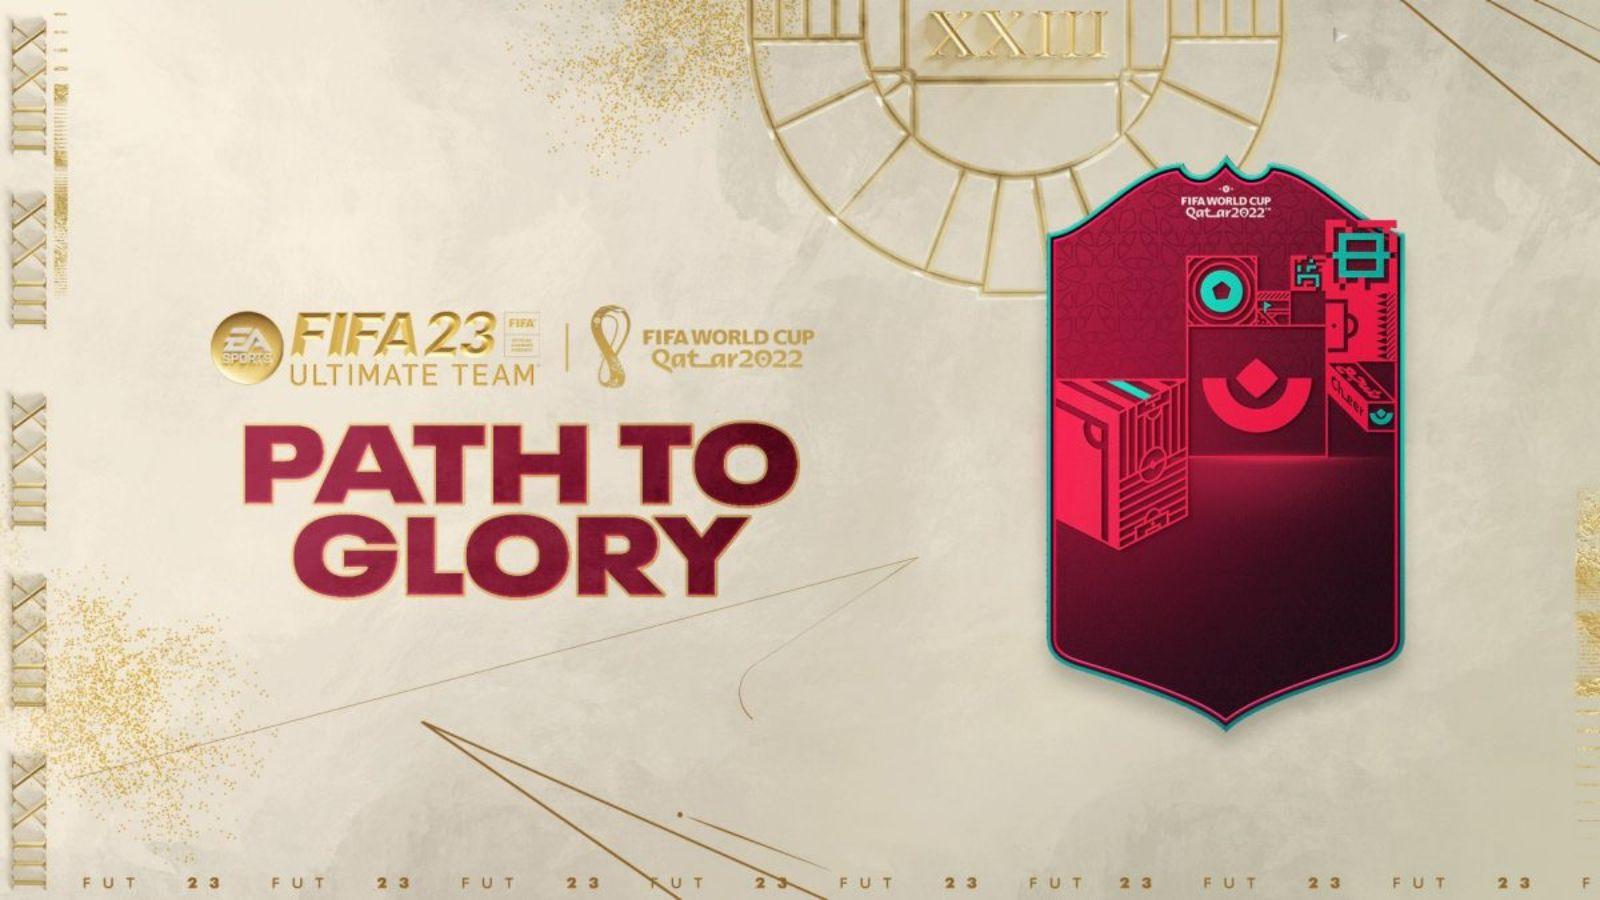 FIFA 23 World Cup Swaps Token Tracker and Path to Glory Tracker